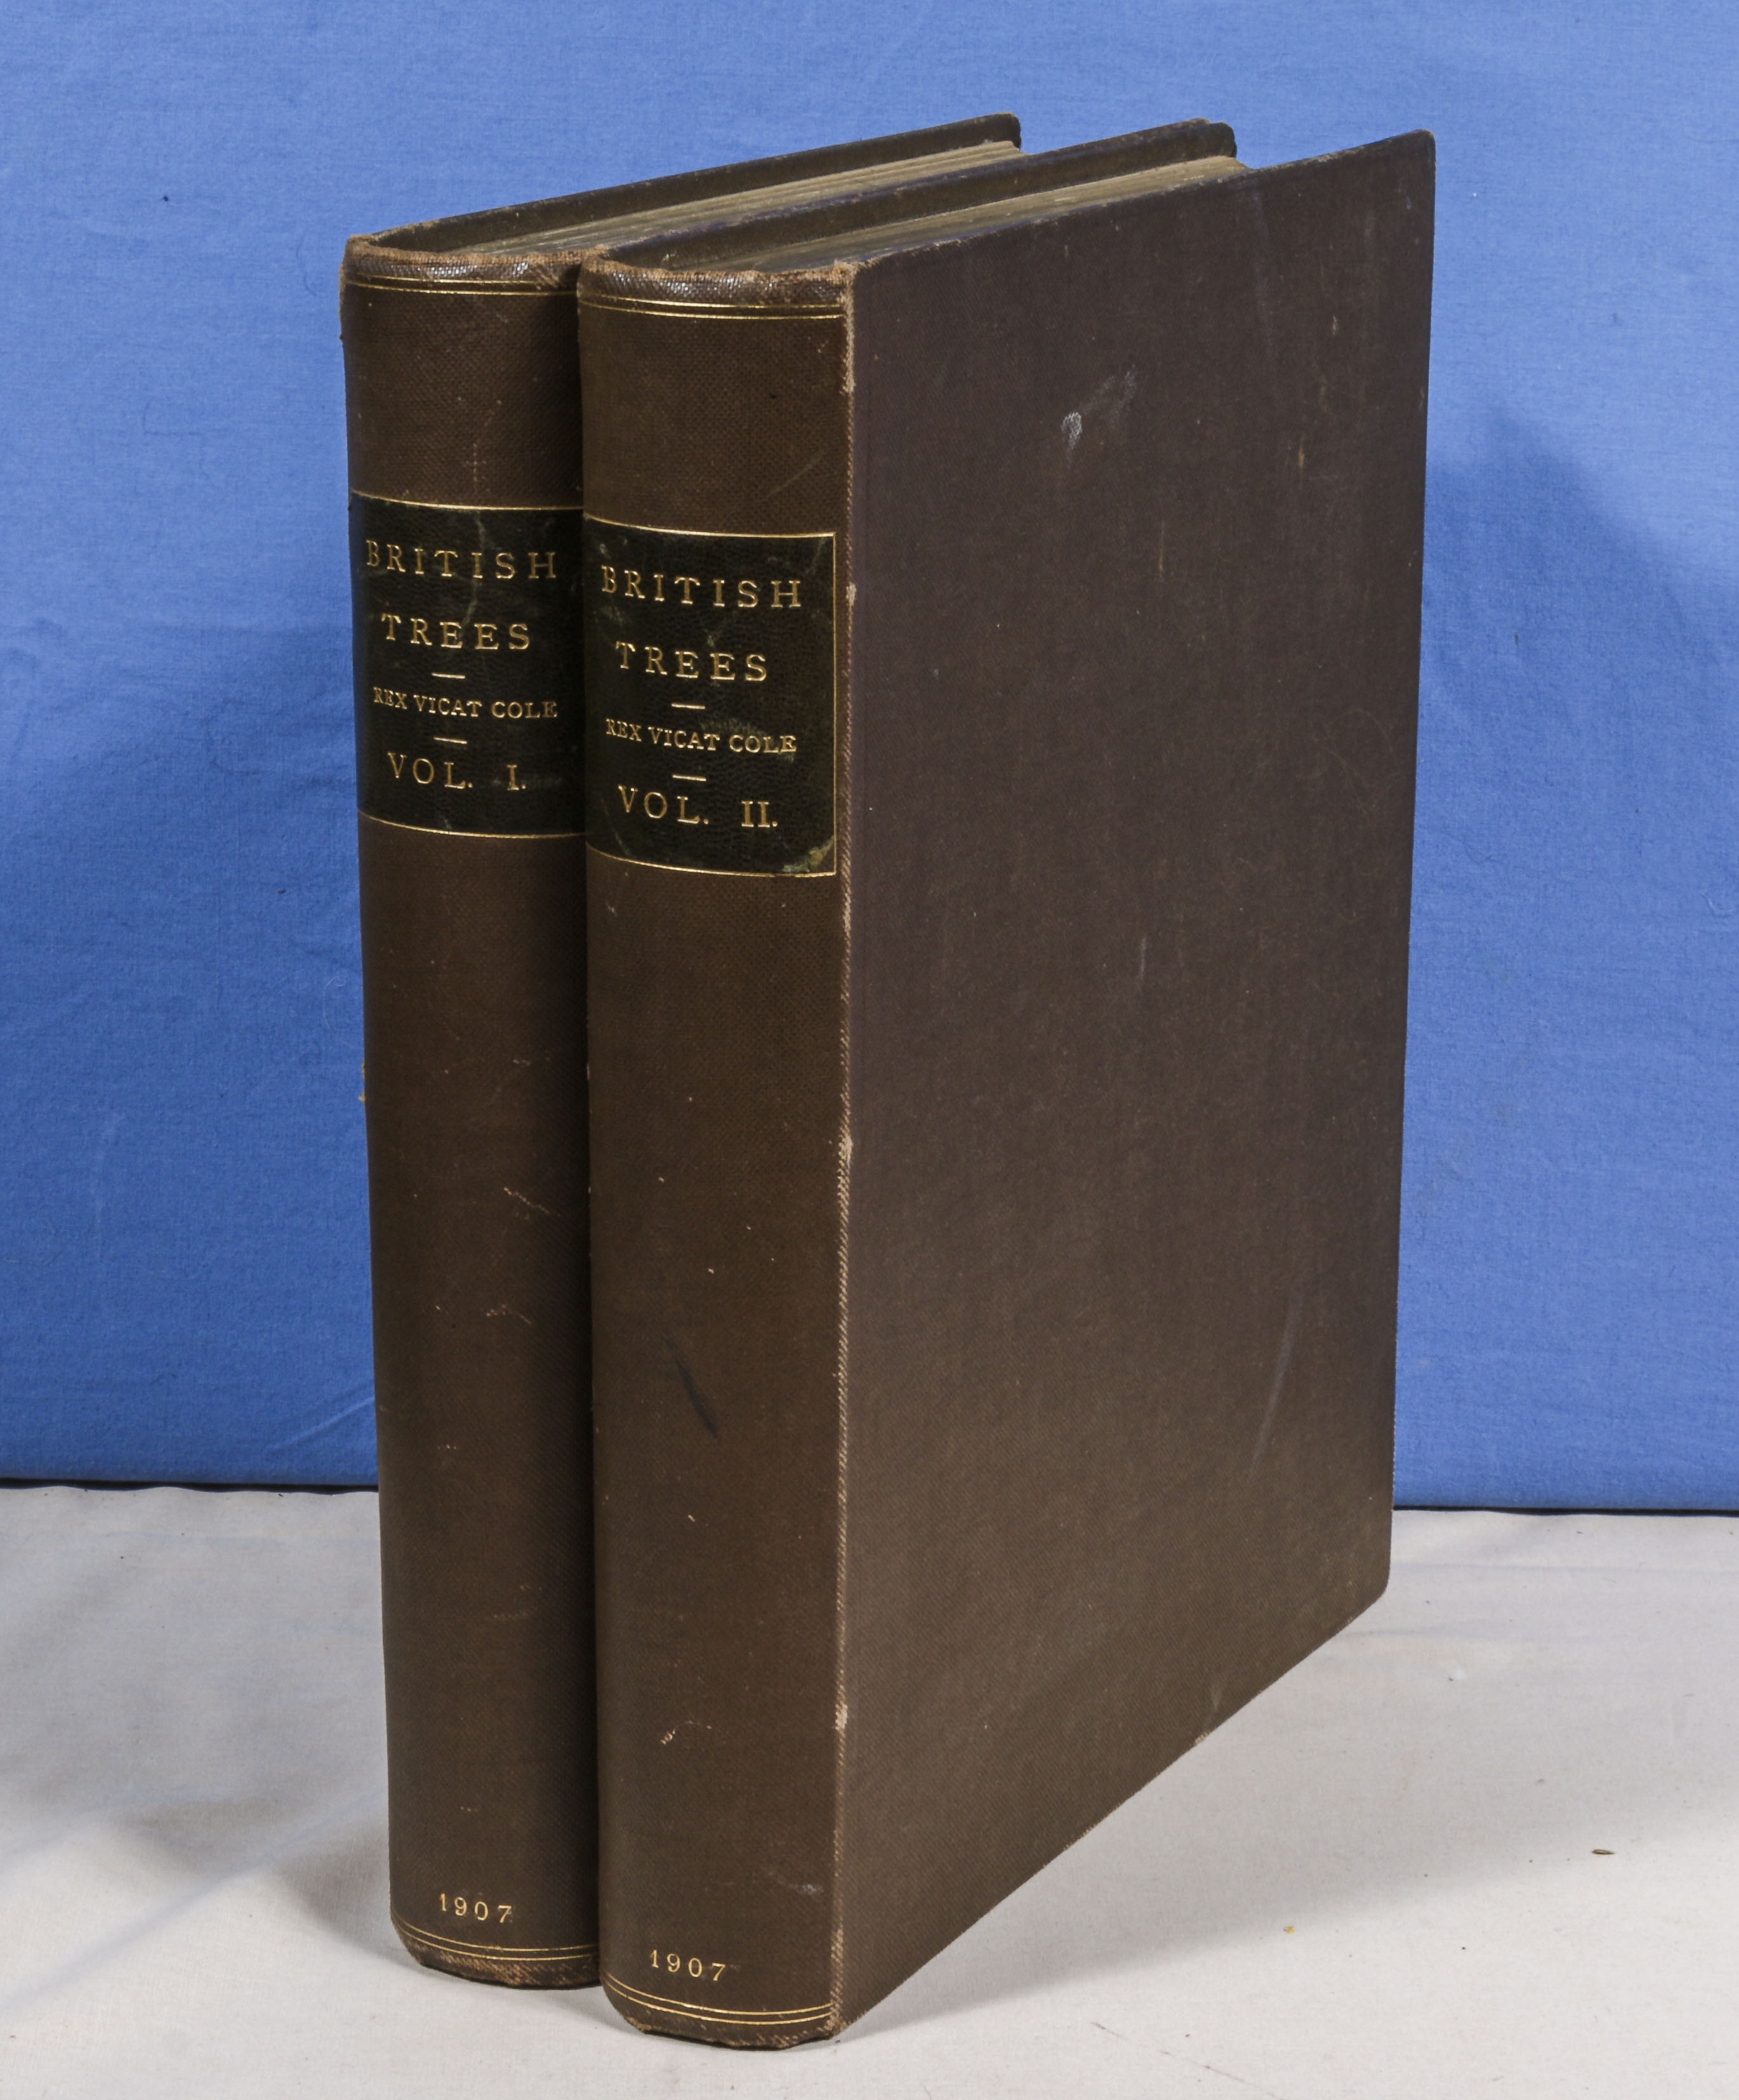 Rex Vicat Cole. 2 volumes, large thick quarto size, British Trees, drawn and described by Rex